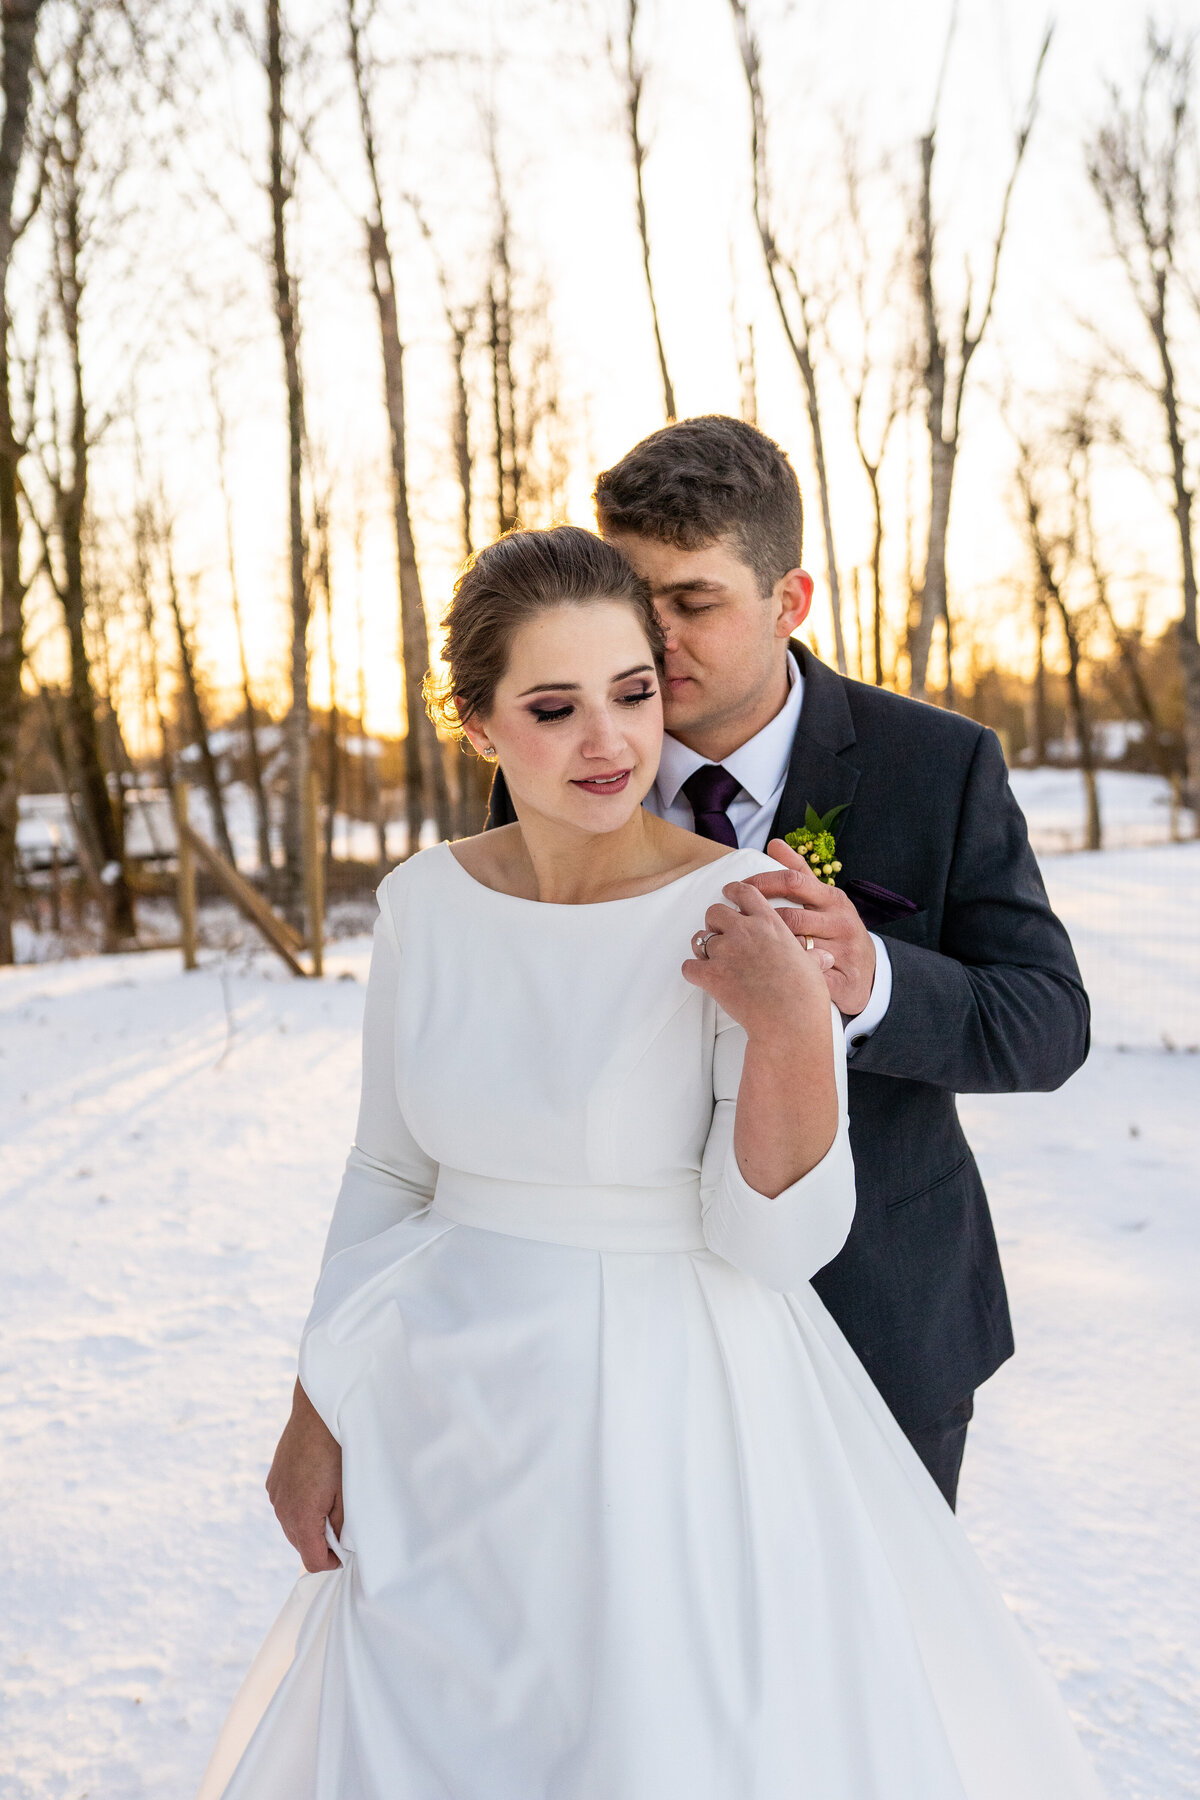 couple at Maan farms during their snowy winter wedding